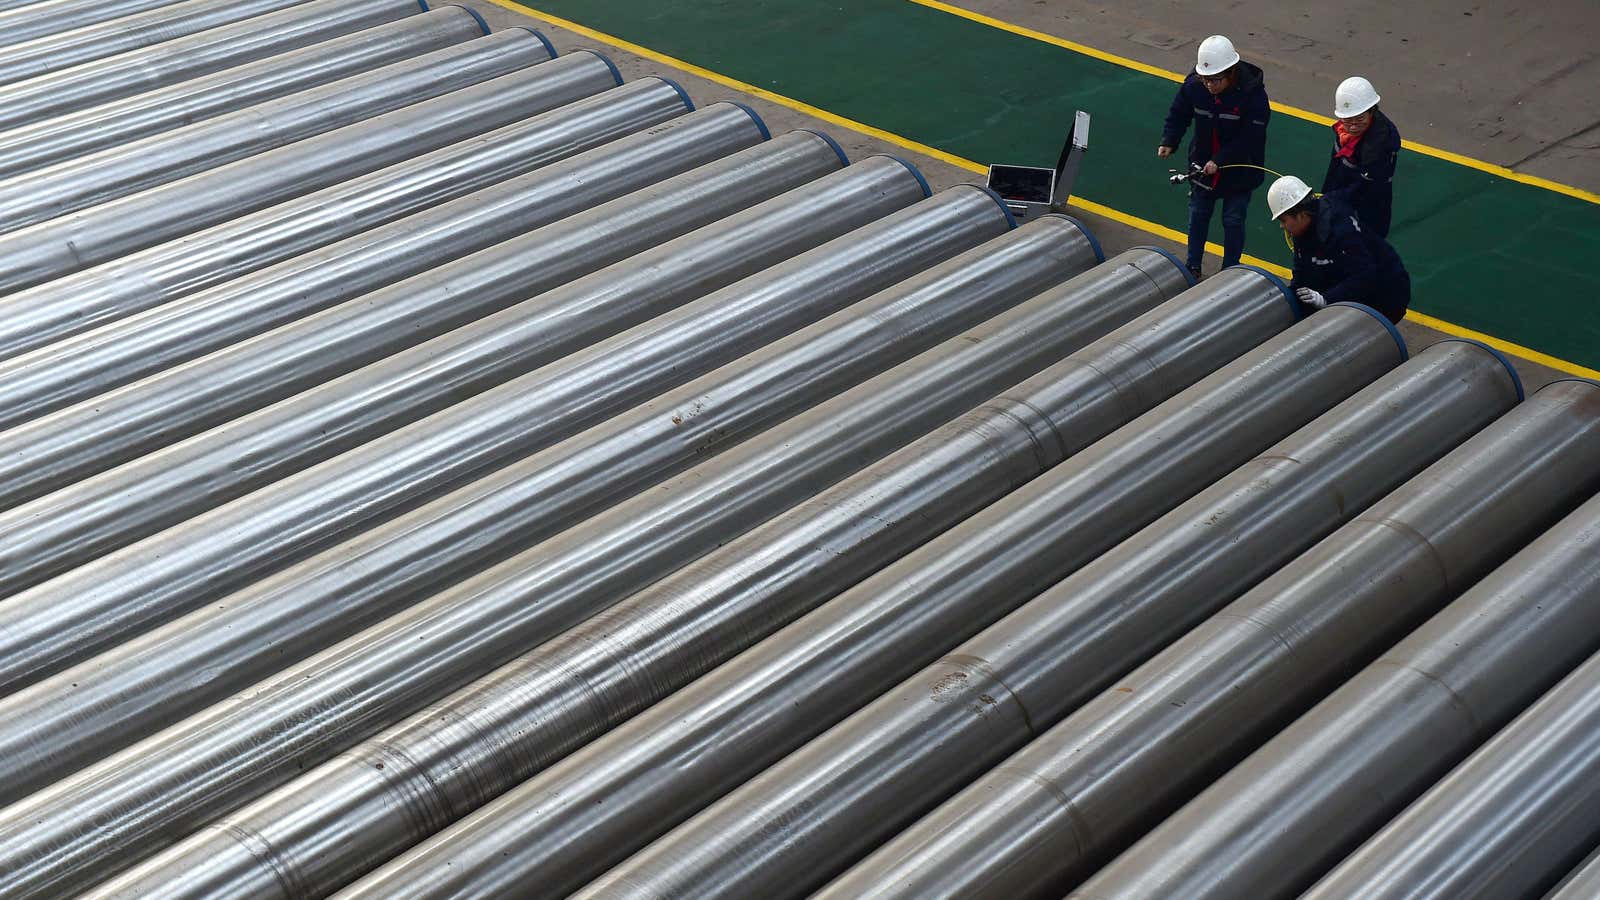 China is determined to cut down its steel production